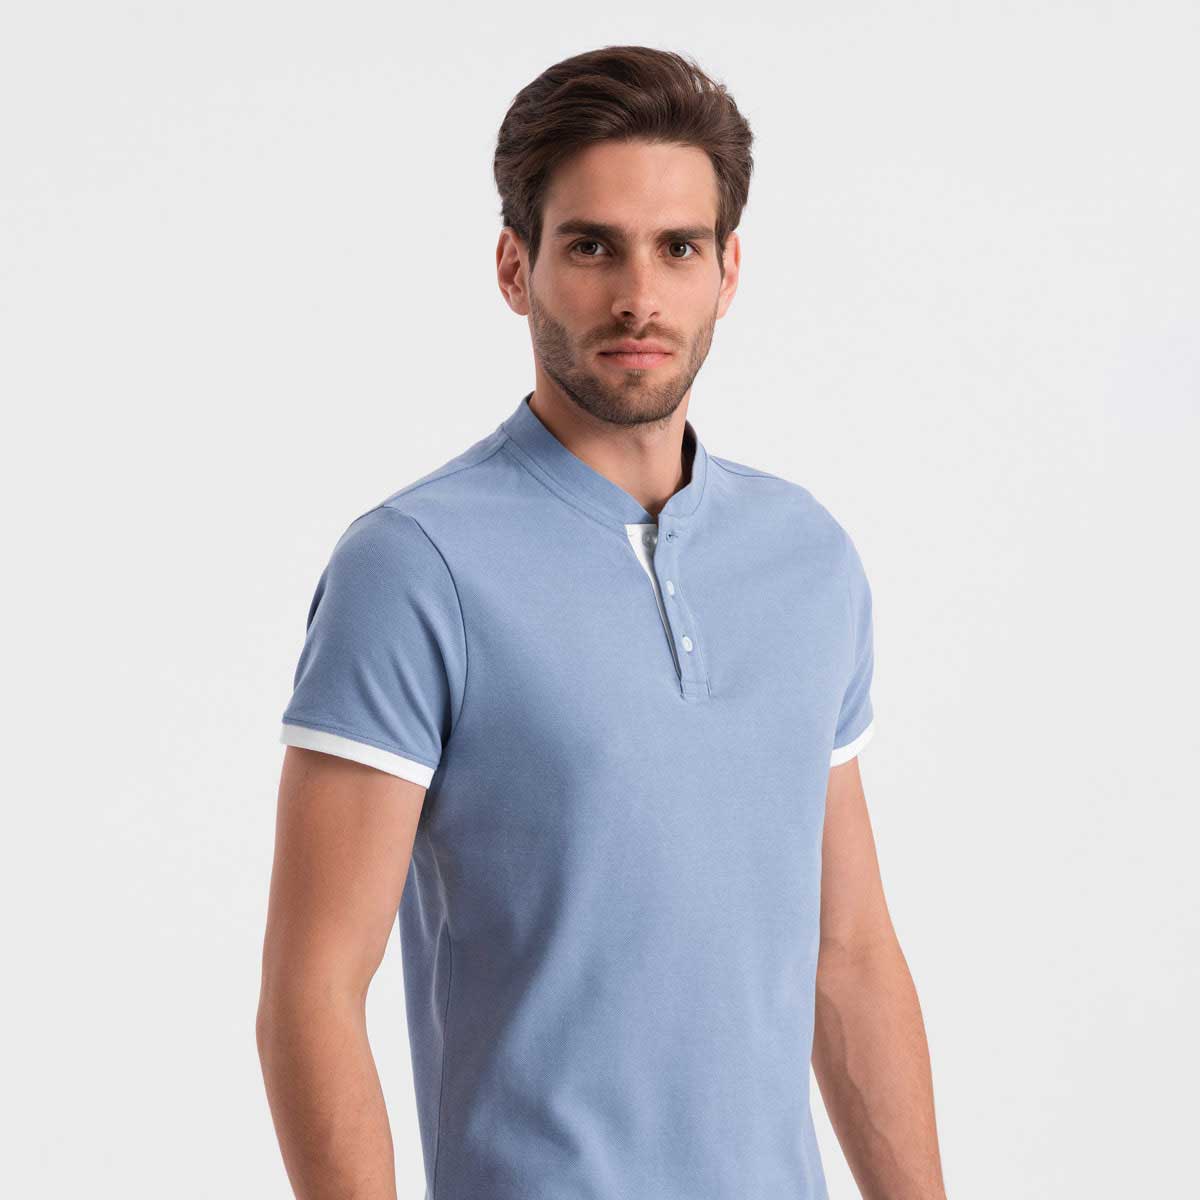 Wholesale Polo Shirts Manufacturers in Gelsenkirchen